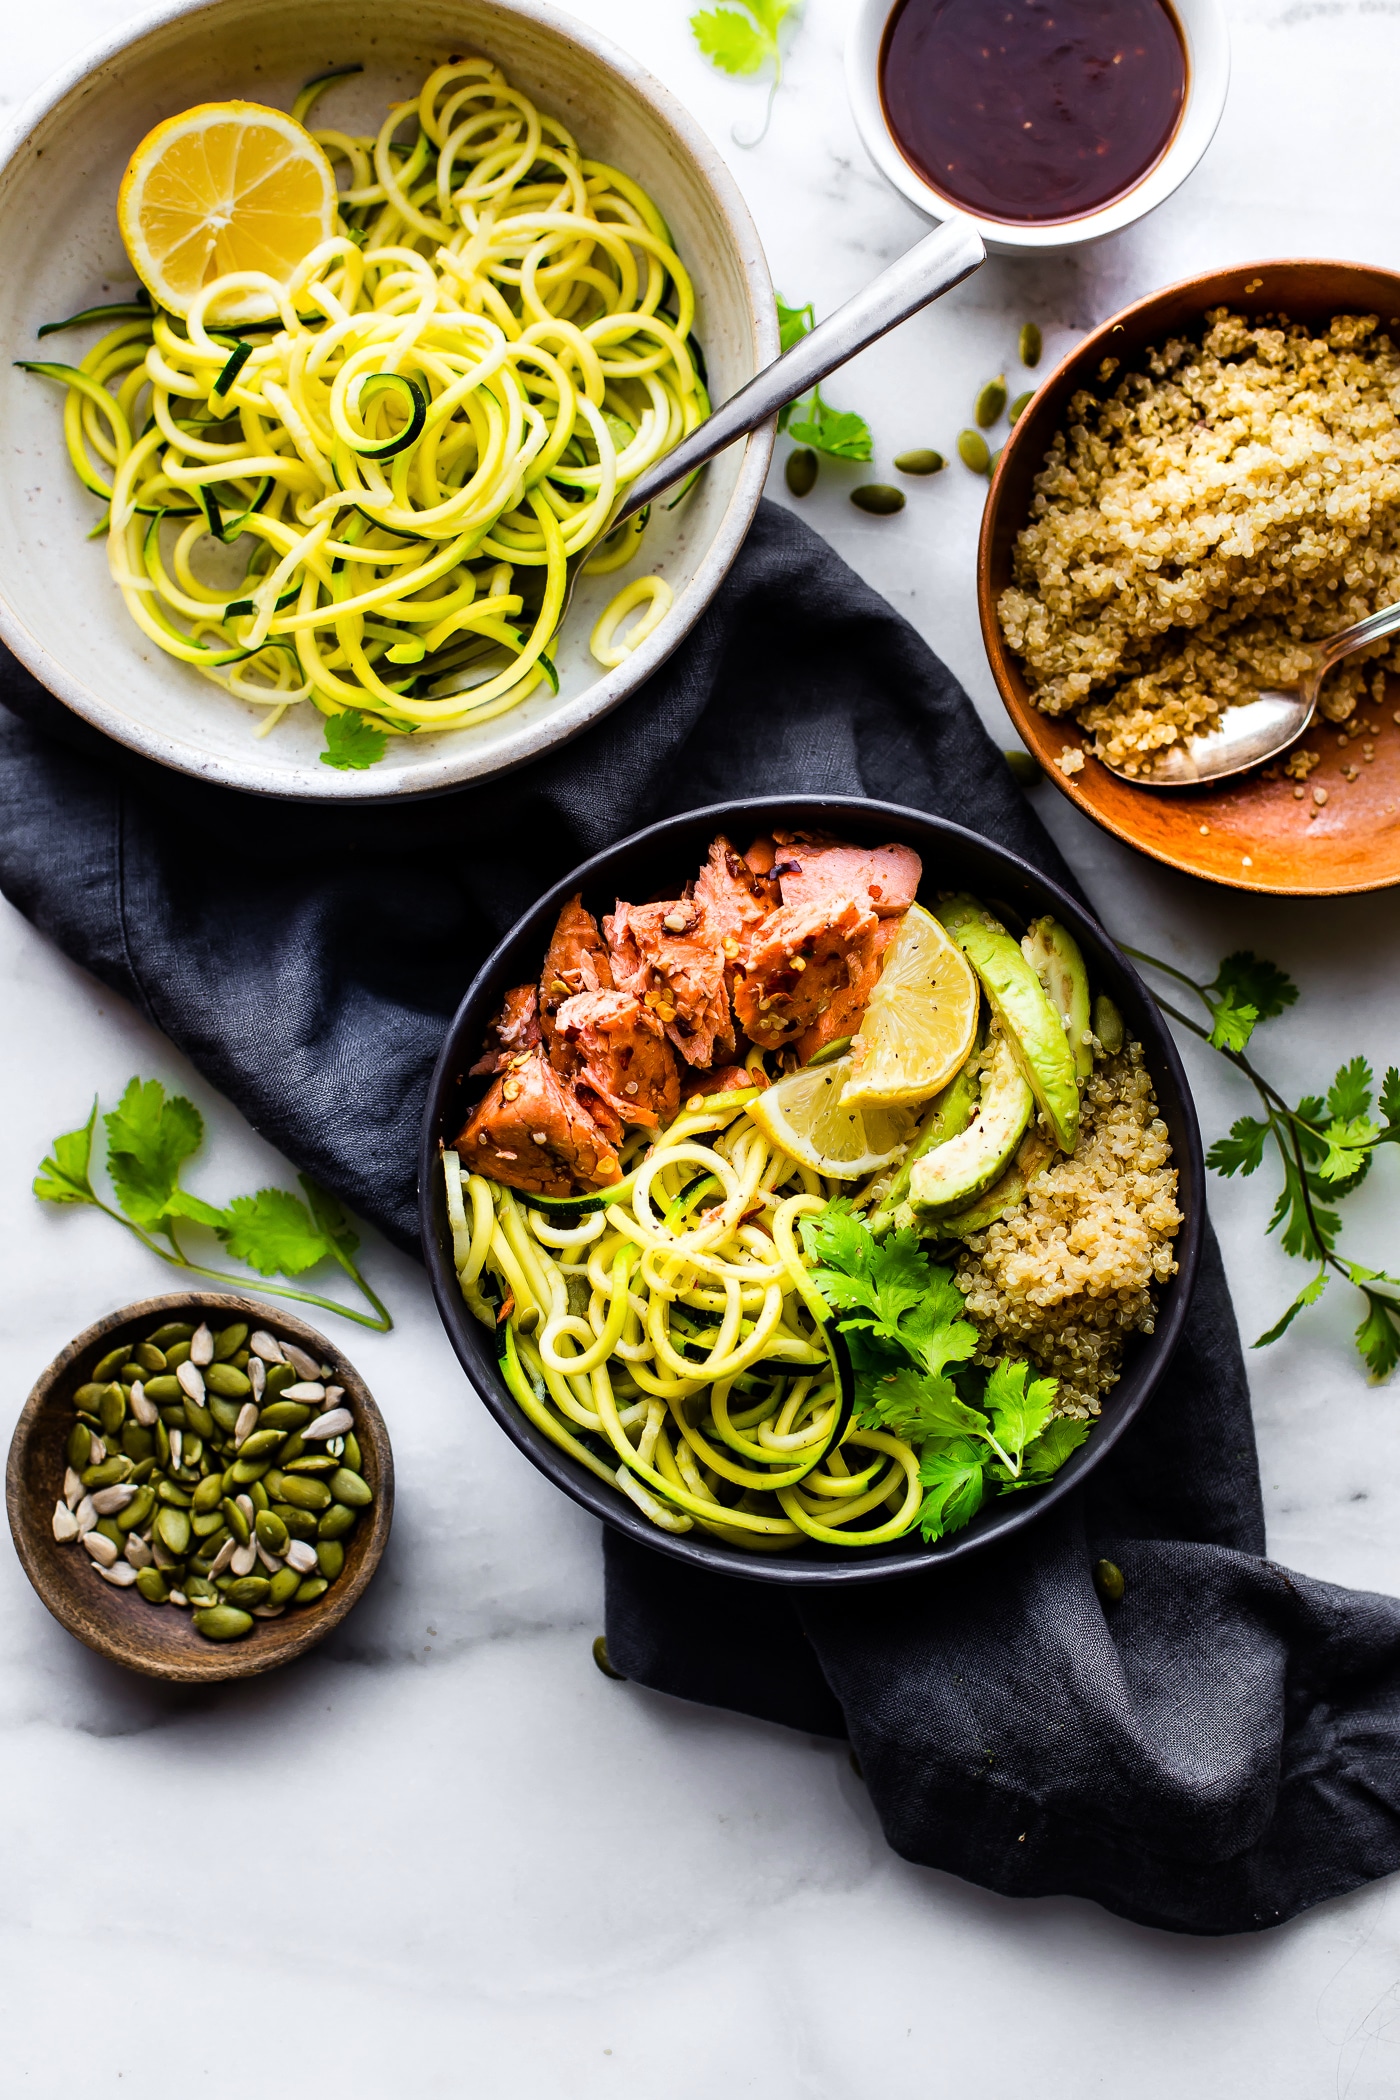 Black bowl filled with quinoa, bbq baked salmon, zucchini noodles and avocado slices